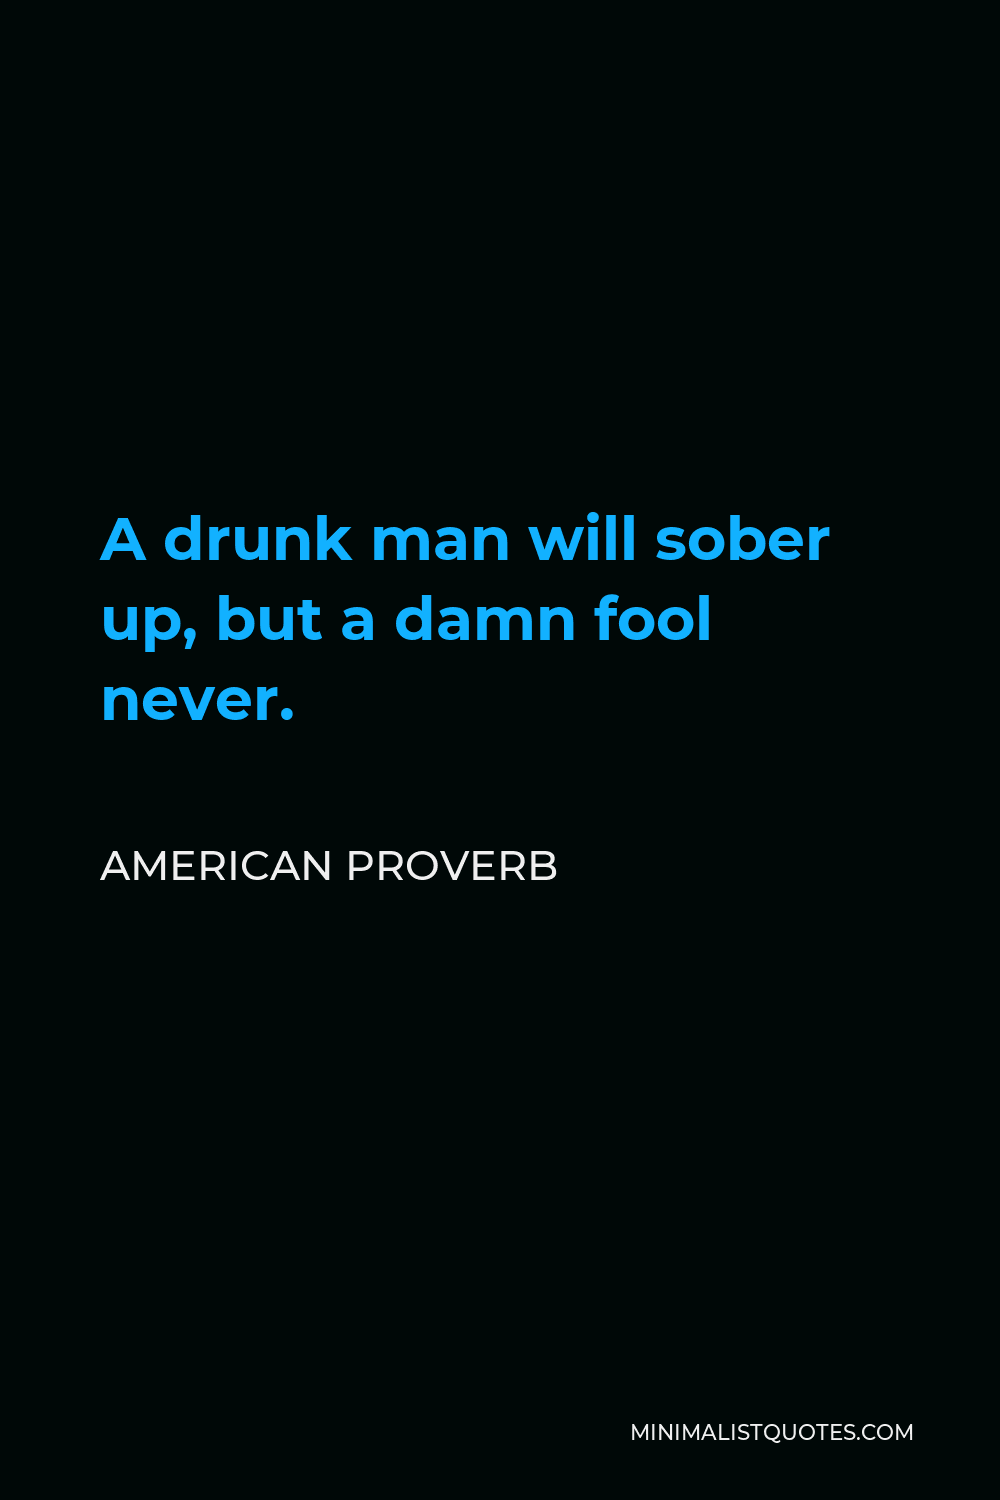 American Proverb Quote - A drunk man will sober up, but a damn fool never.